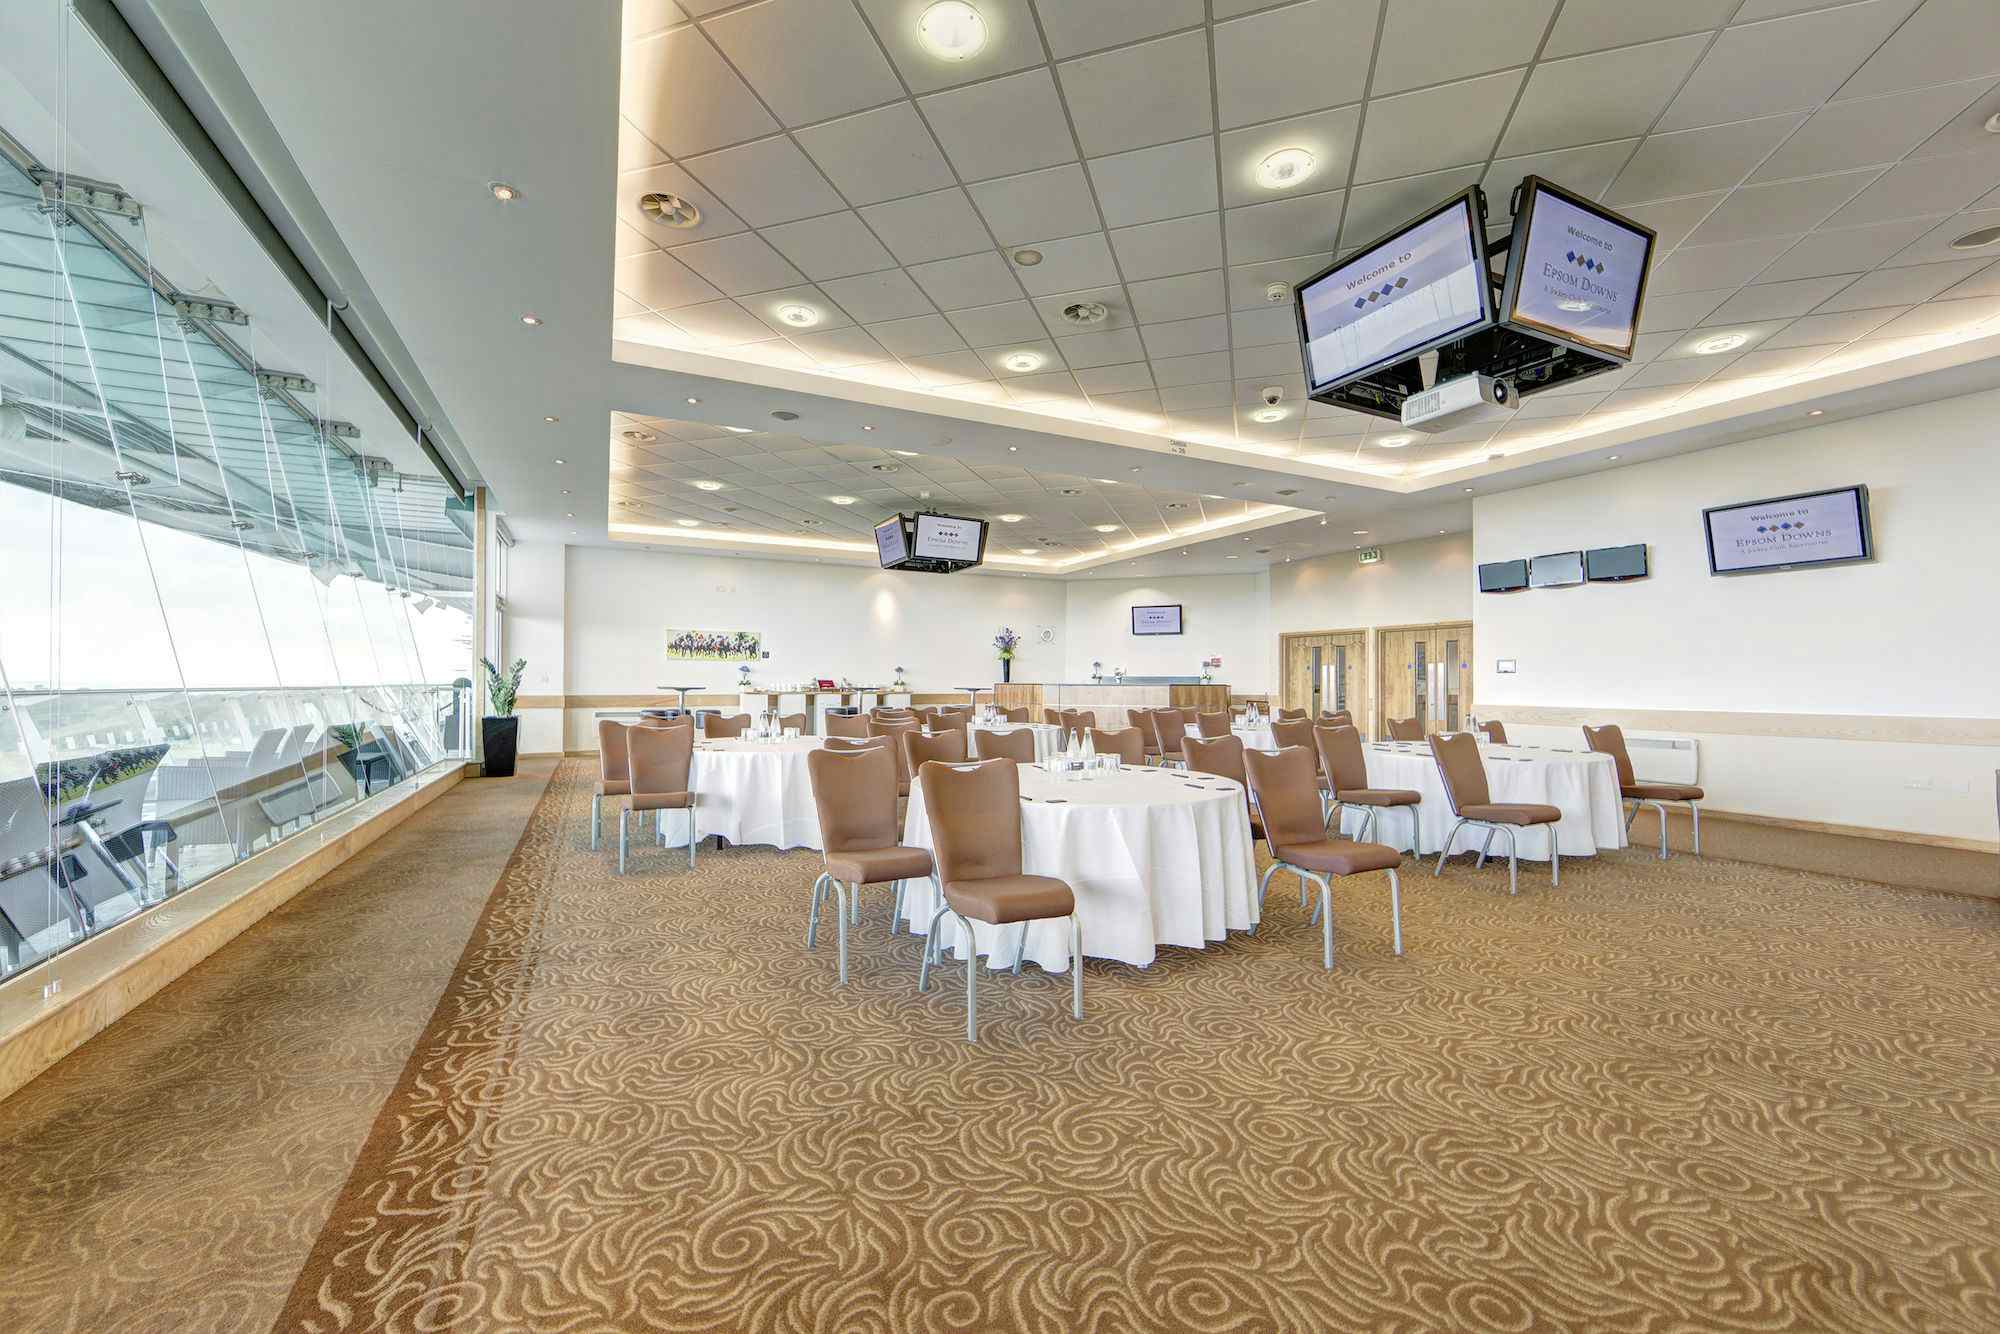 Downs View Room, Epsom Downs Racecourse